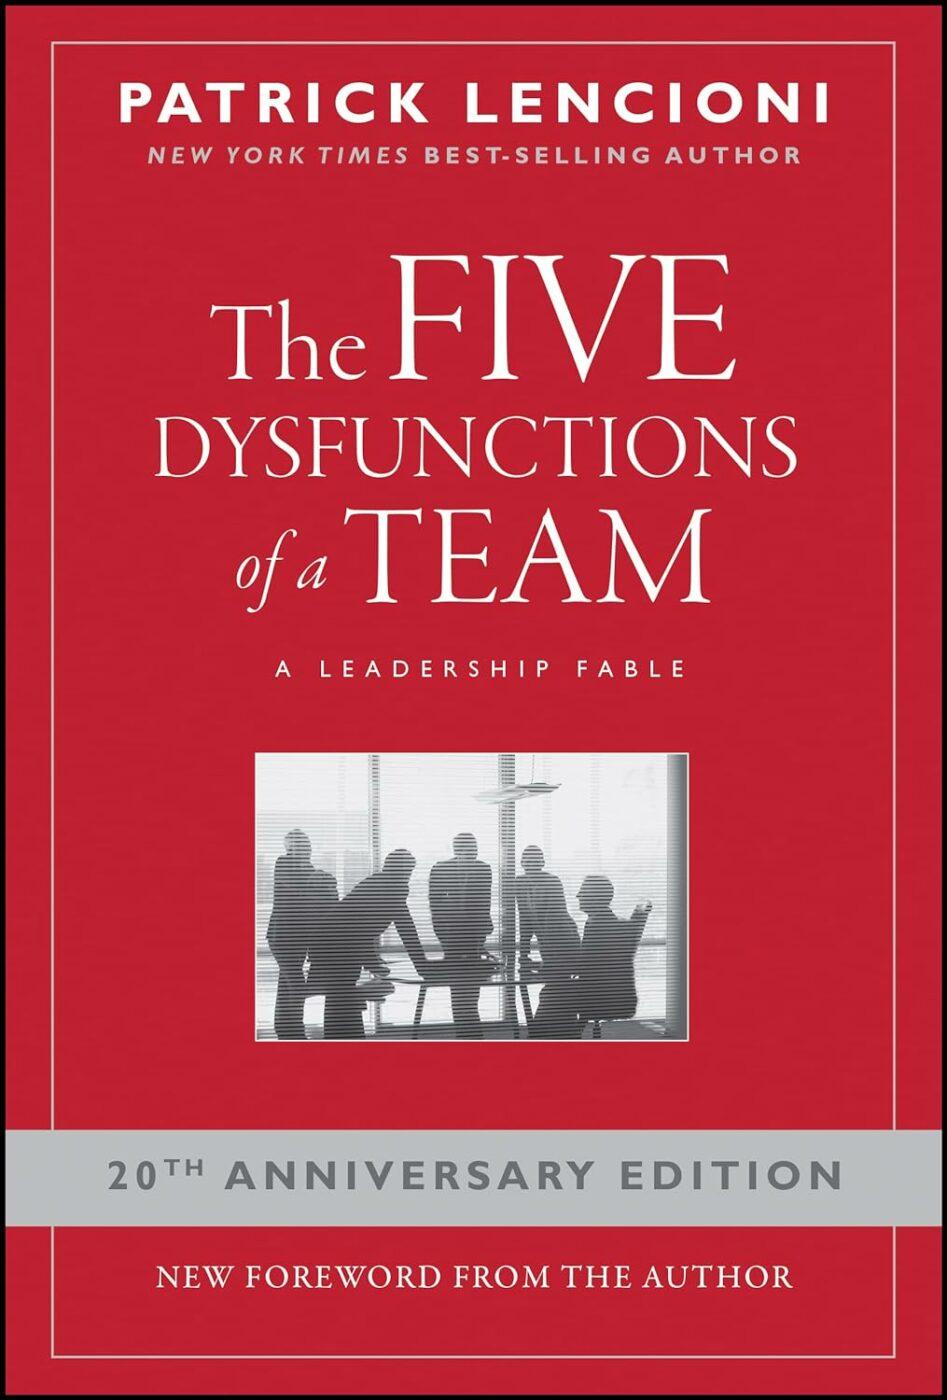 The Five Dysfunctions of a Team summary